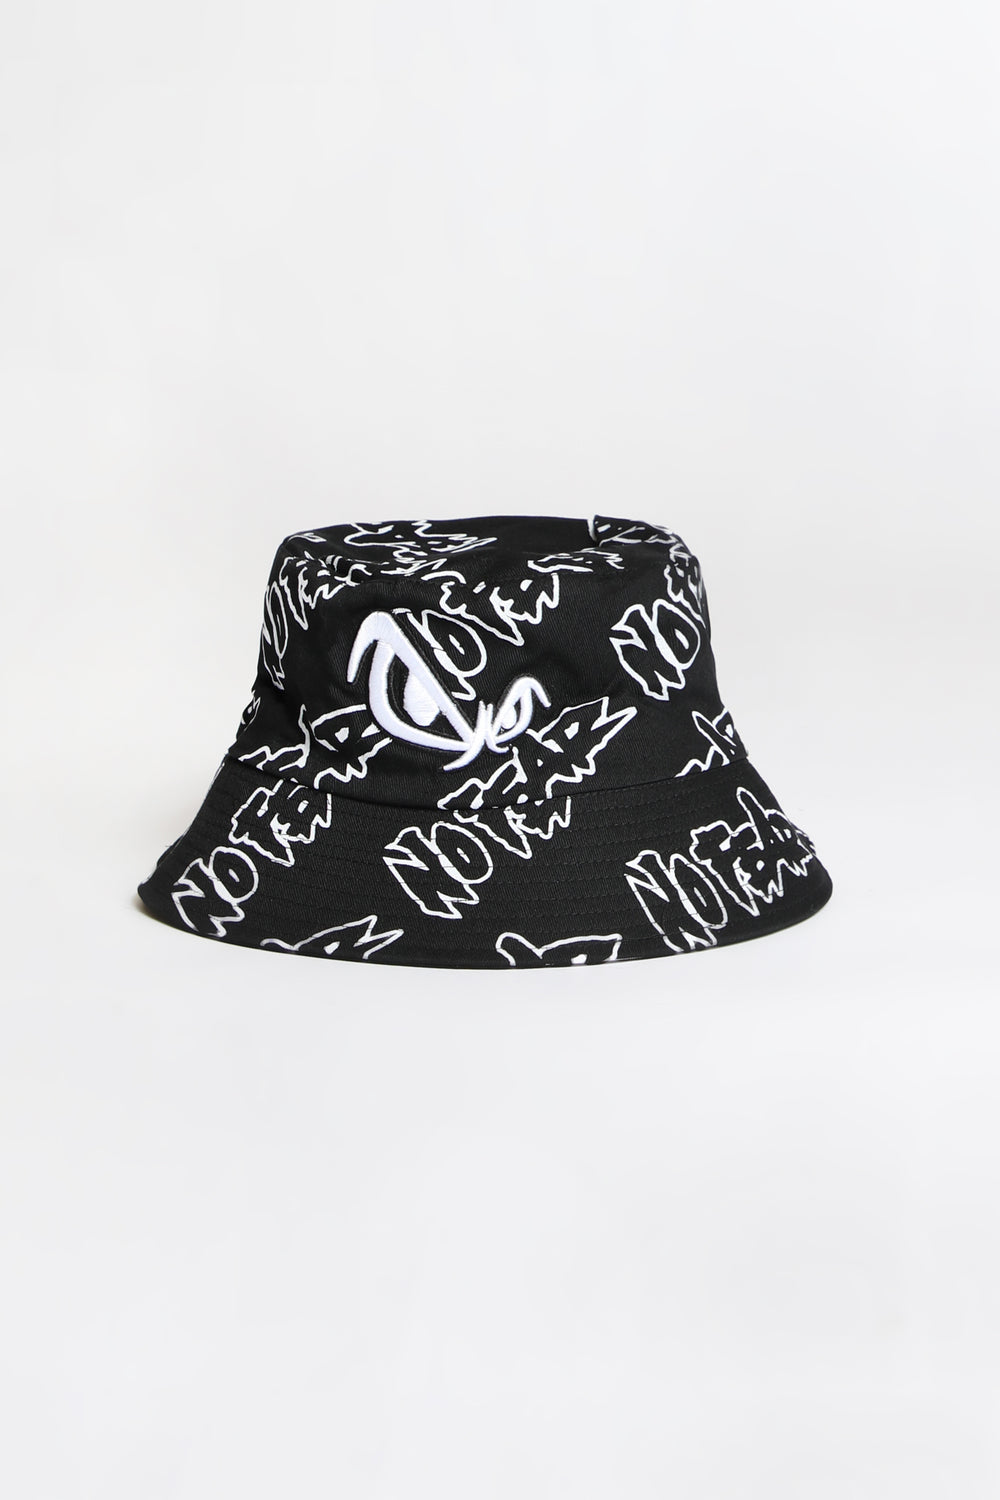 No Fear Youth Reversible Patch Bucket Hat Black